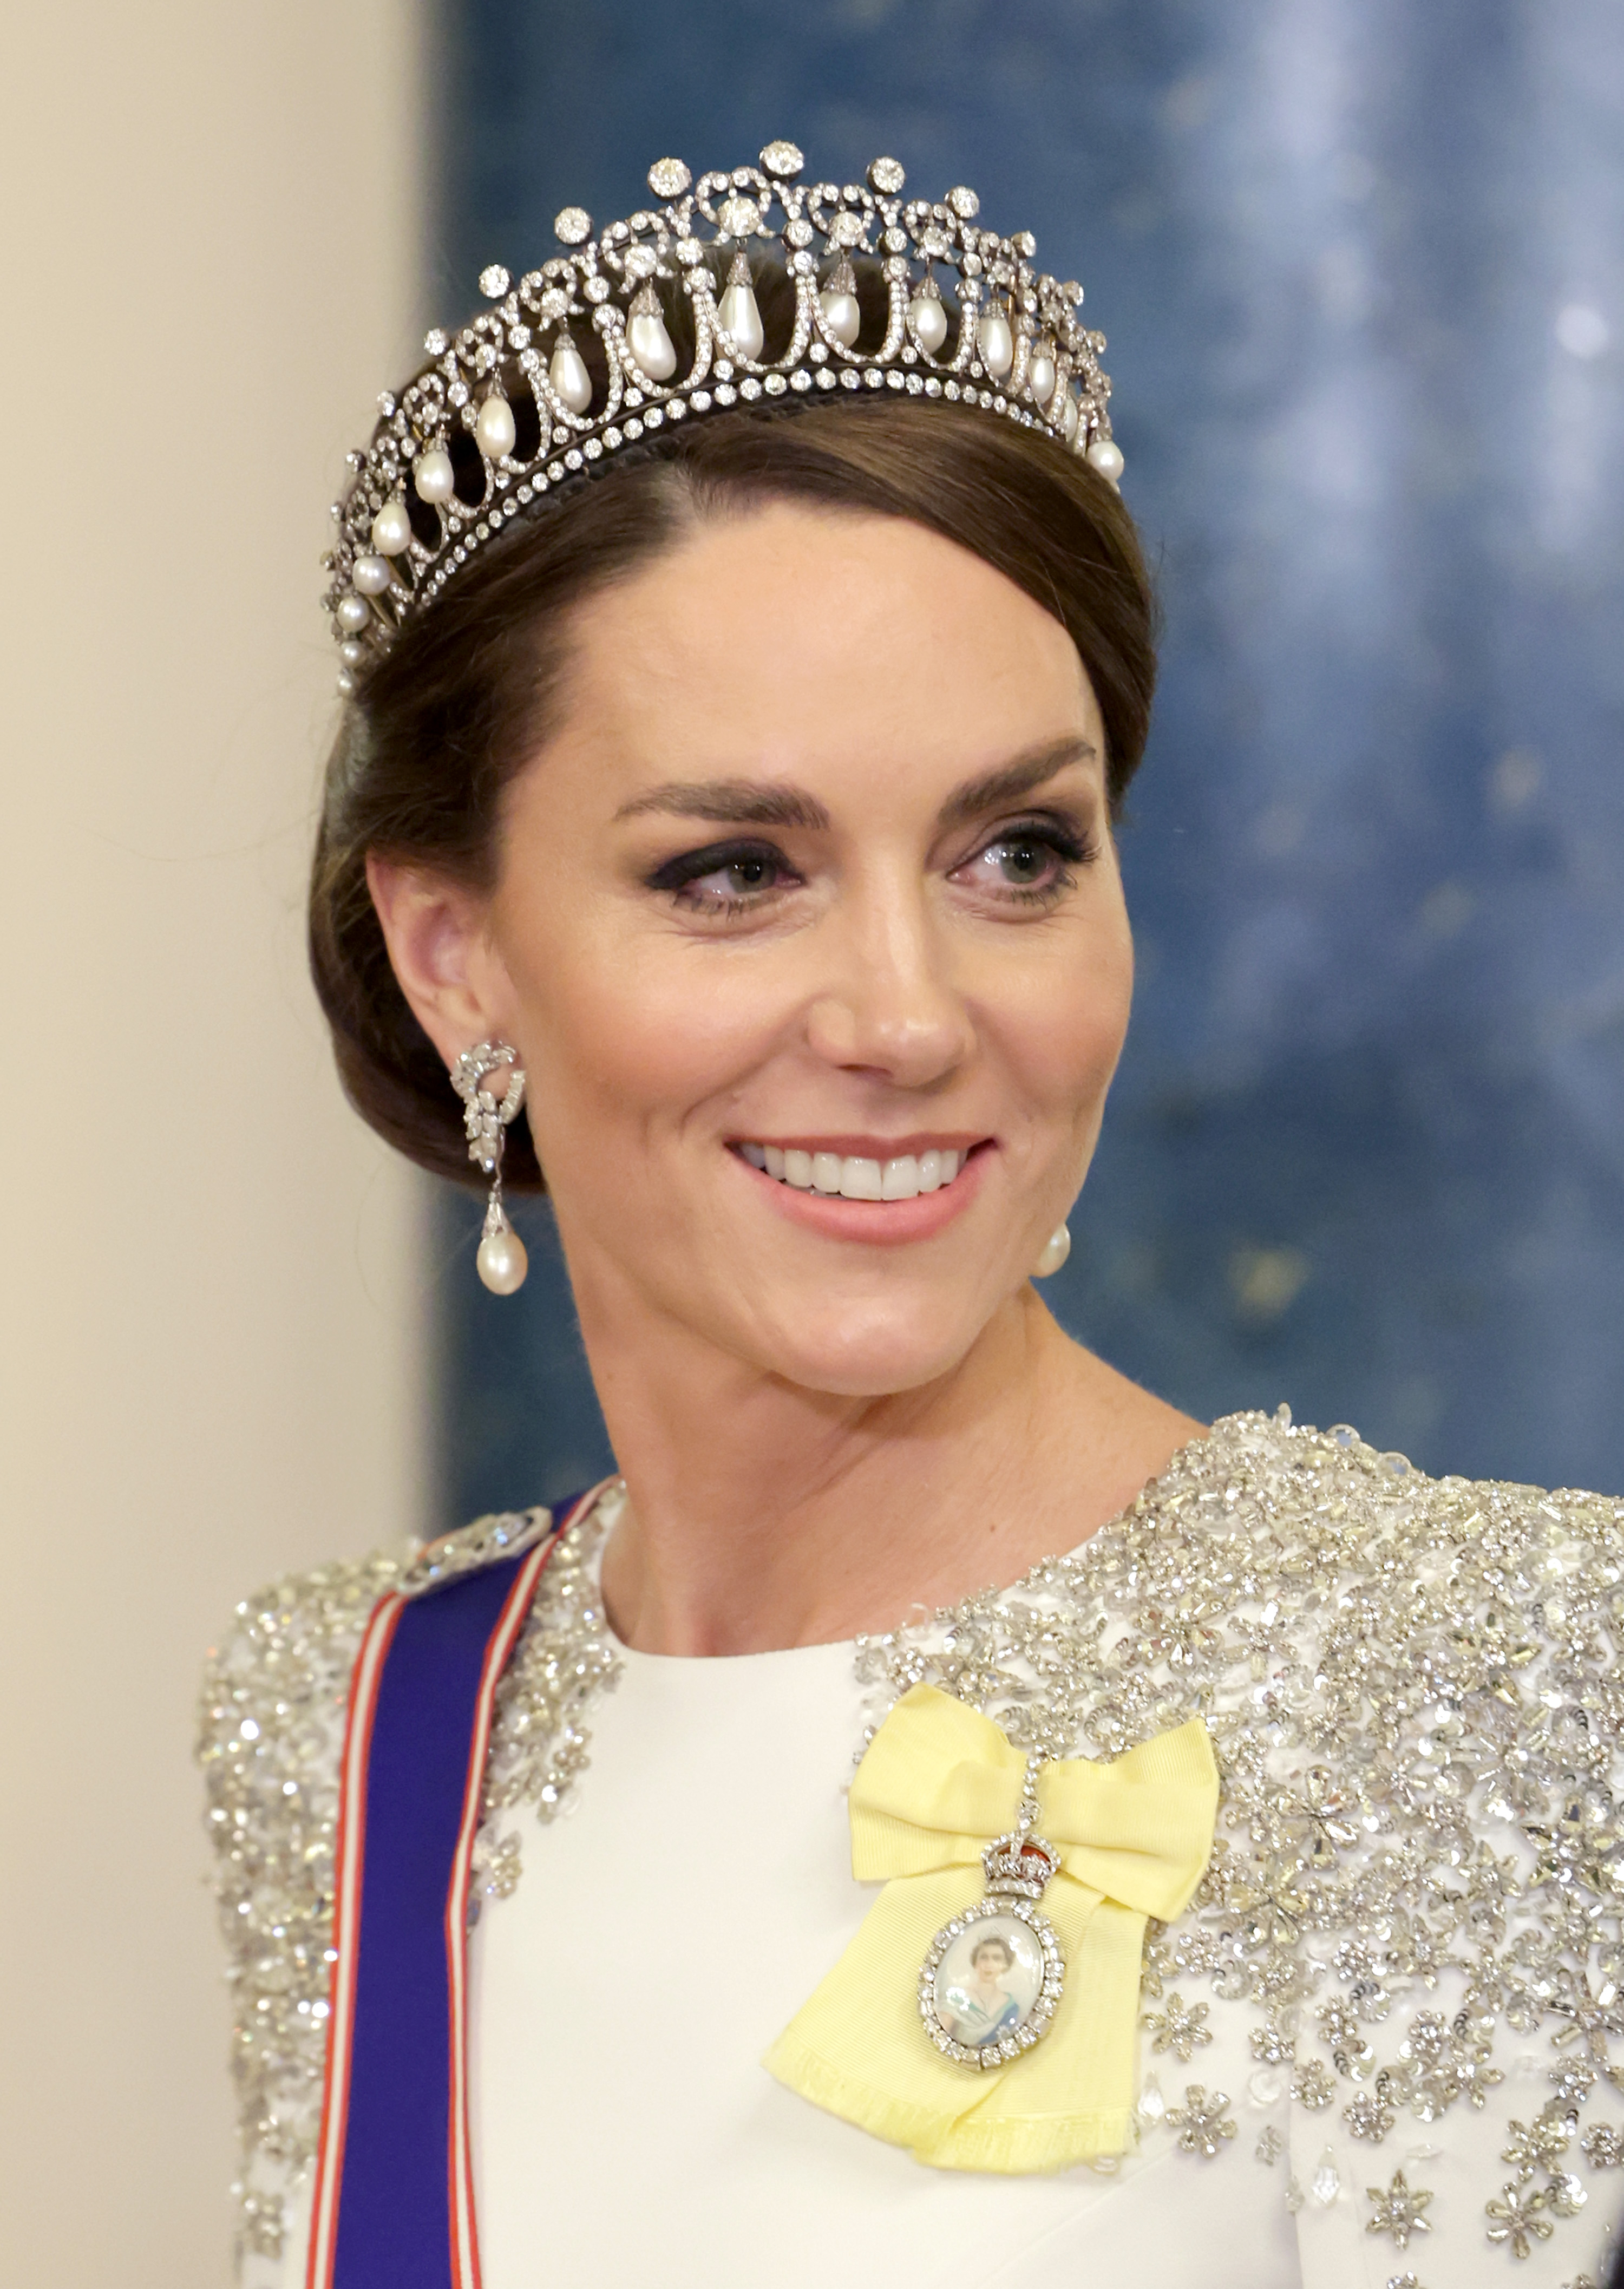 Kate Middleton during the State Banquet at Buckingham Palace on November 22, 2022 in London, England. | Source: Getty Images